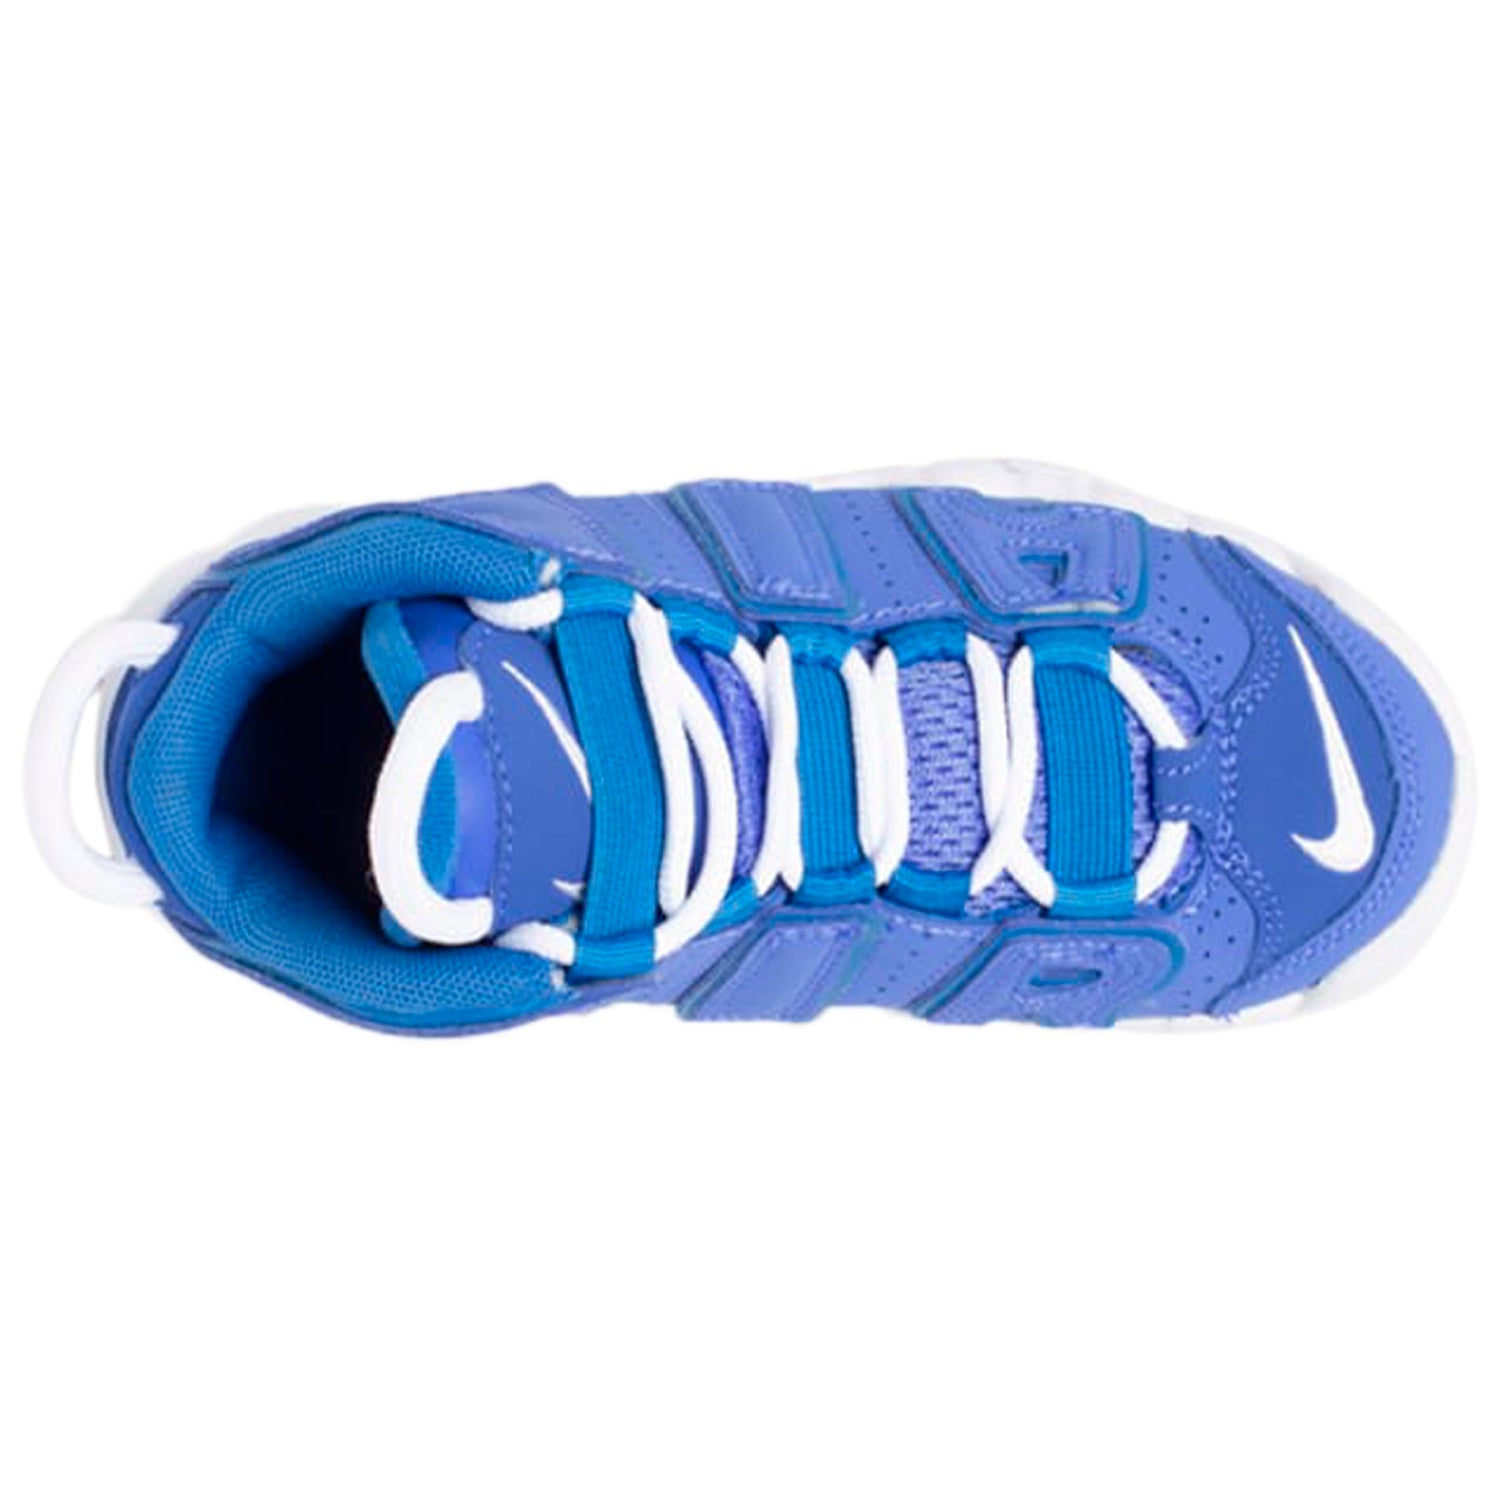 Nike Air More Uptempo Battle Blue (PS)